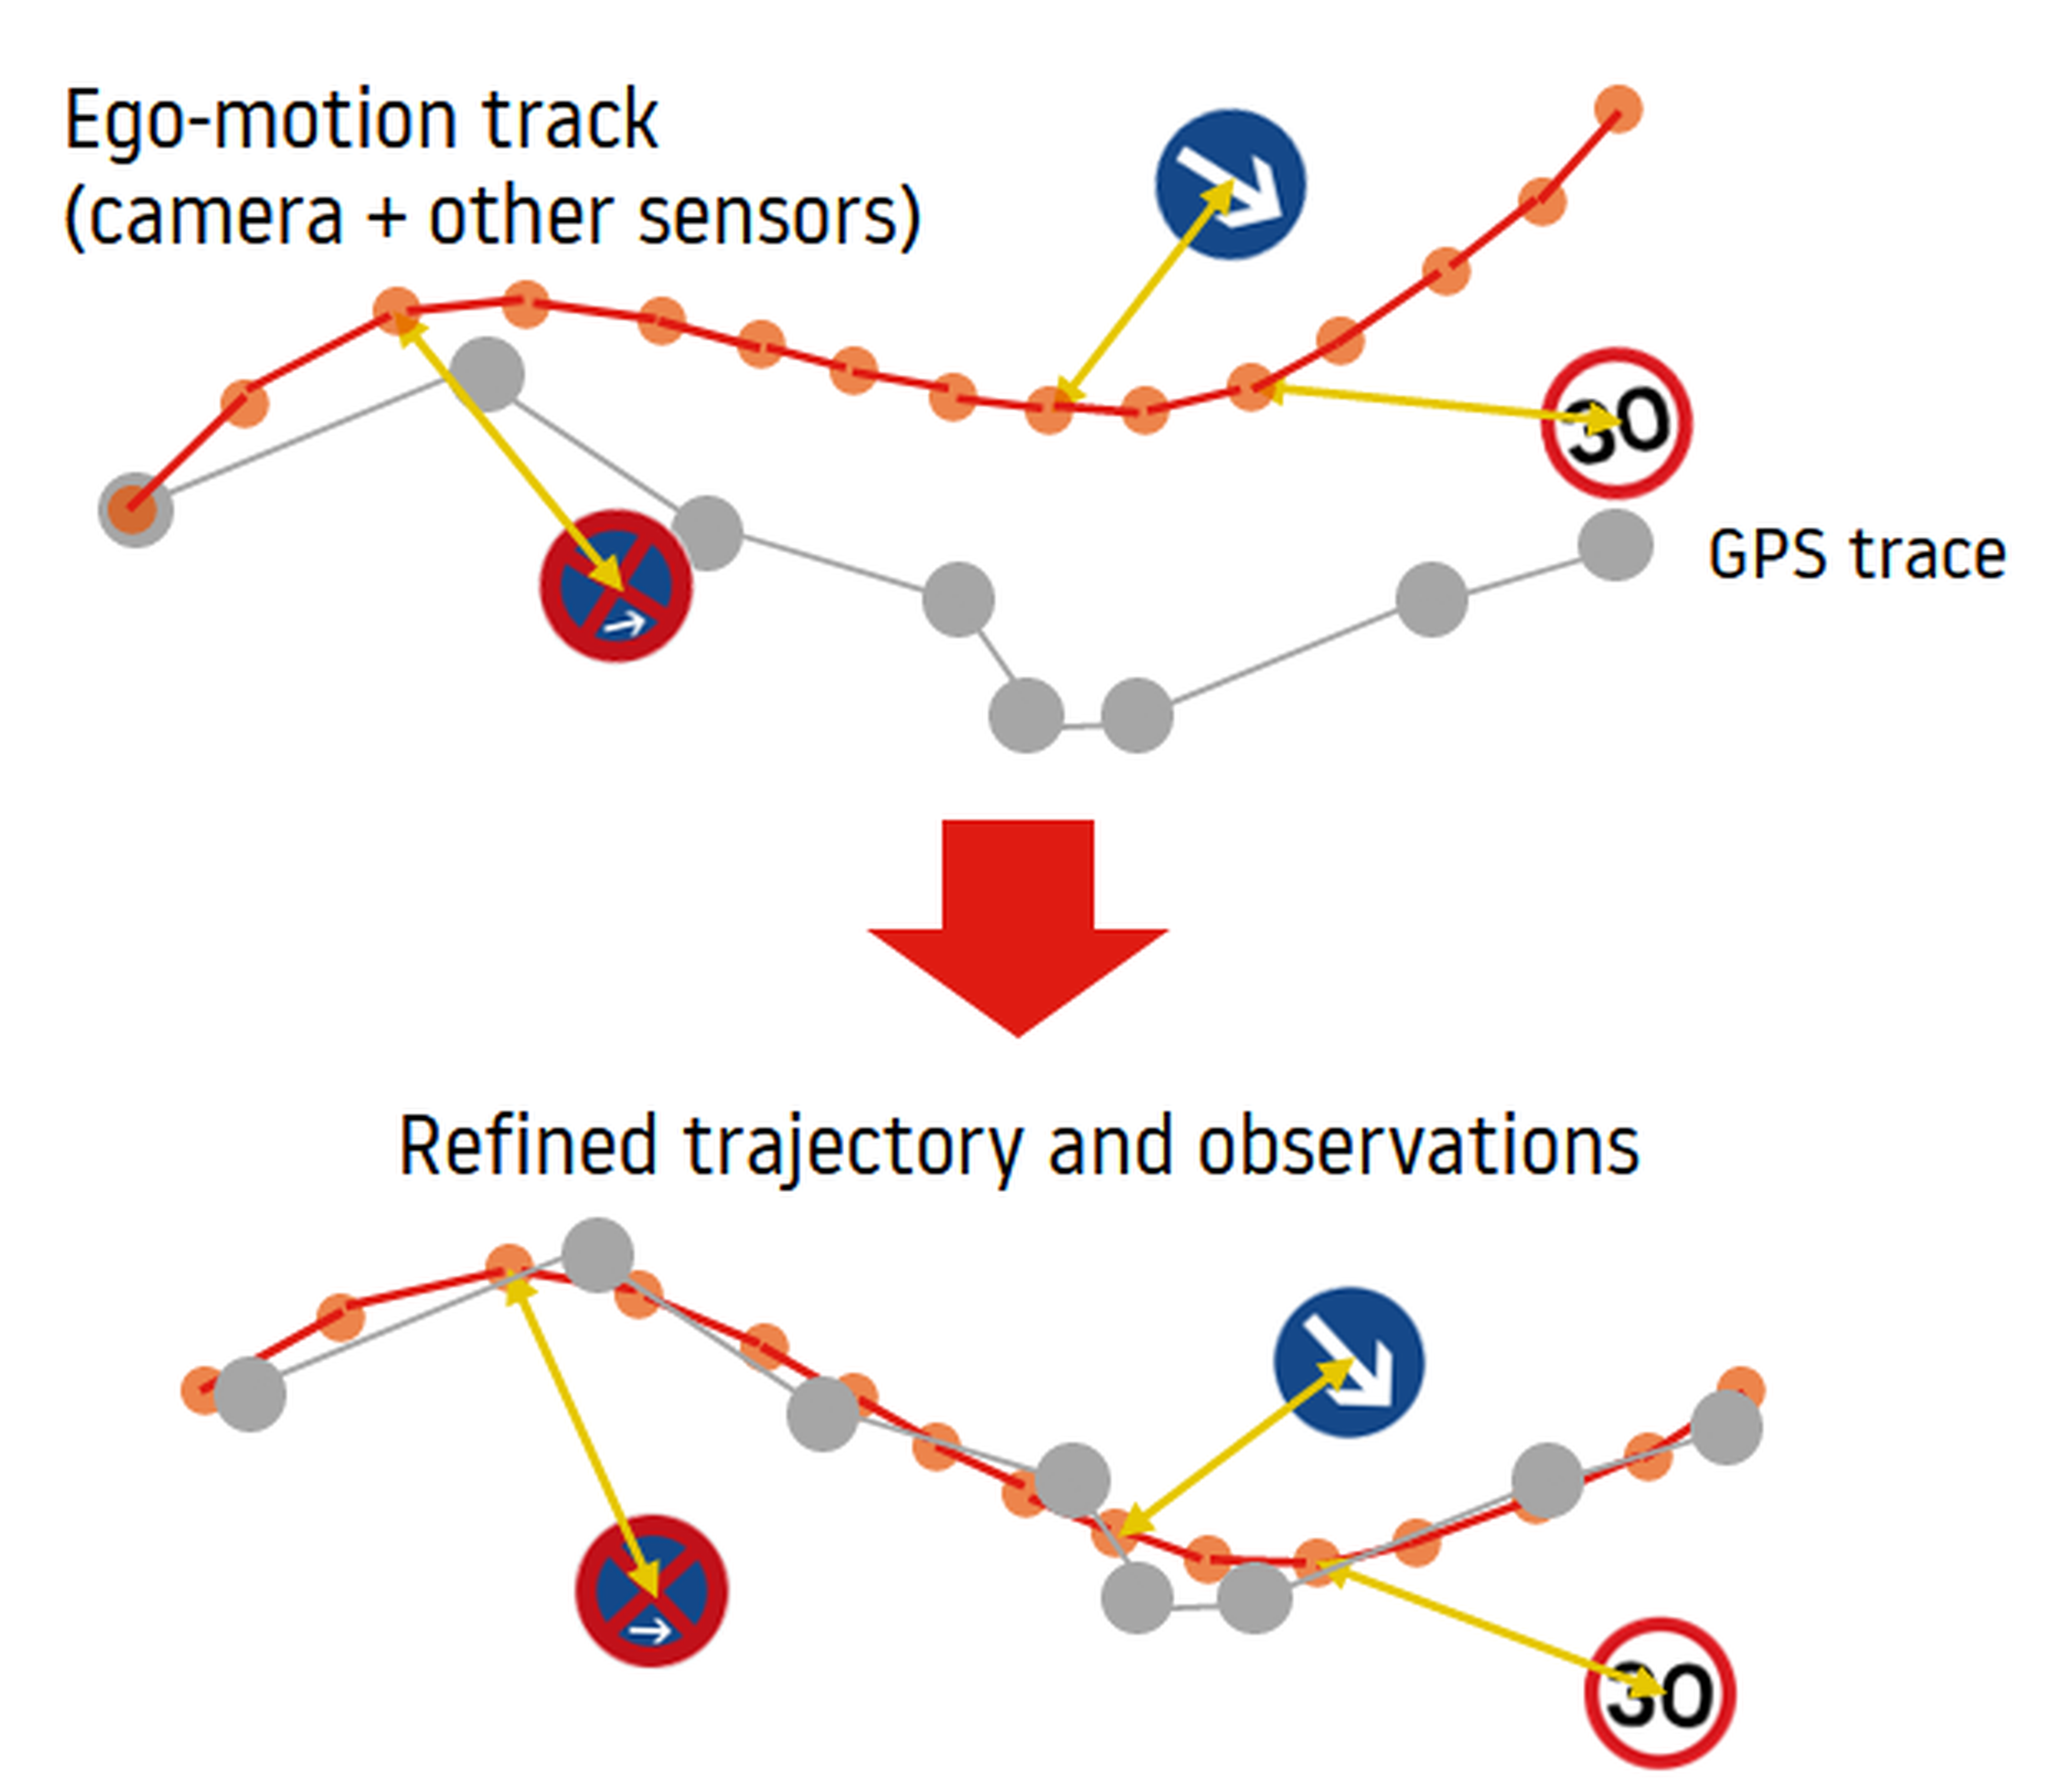 Sensor-fusion: GNSS (GPS) data and IMU data are combined to improve localization (image: team resources).